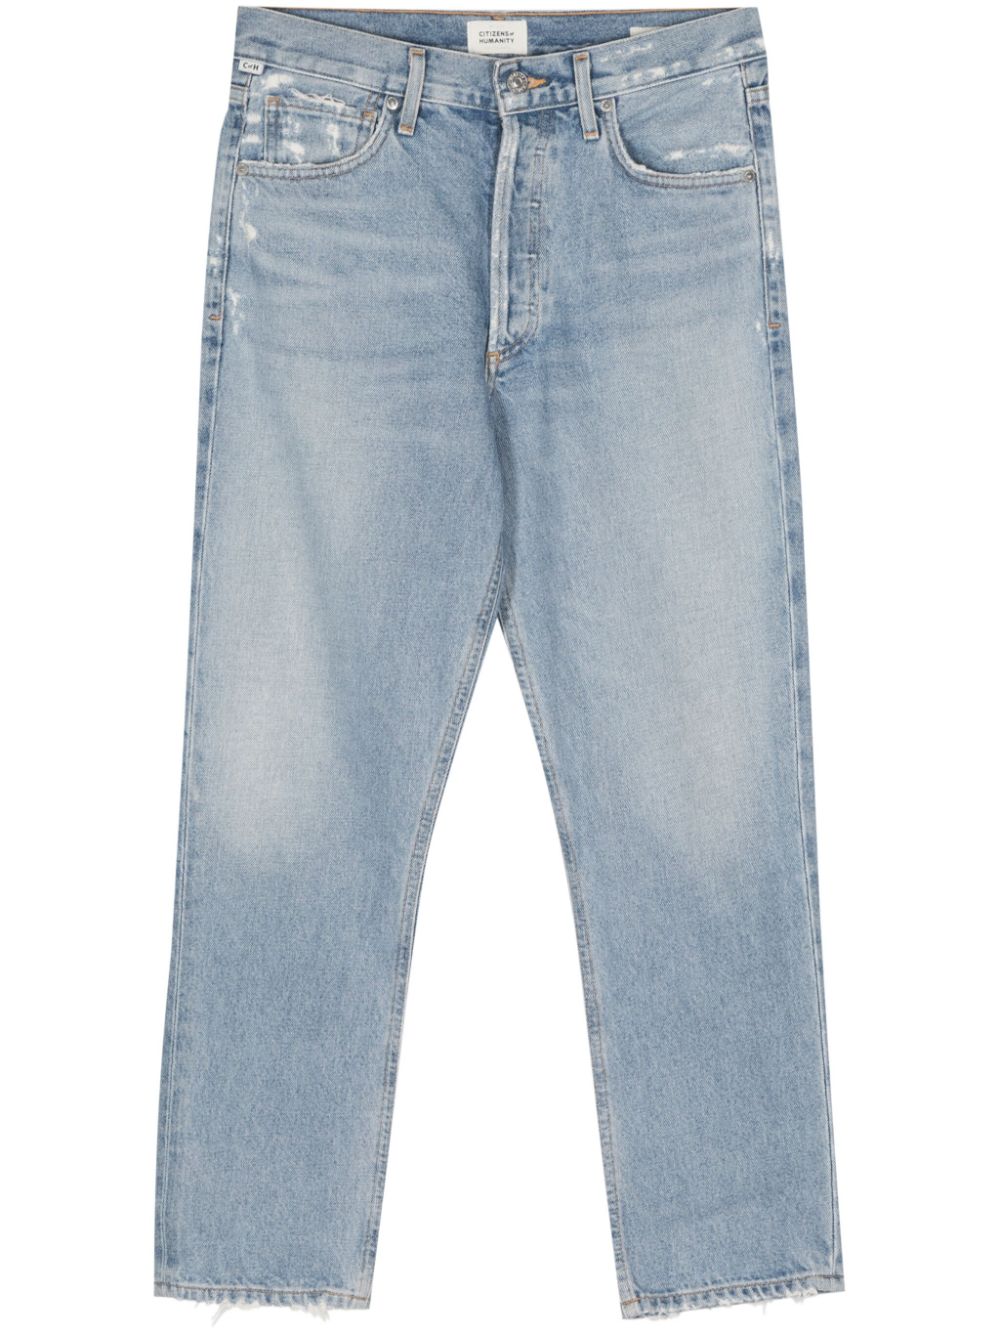 Citizens of Humanity Charlotte cotton cropped jeans - Blue von Citizens of Humanity